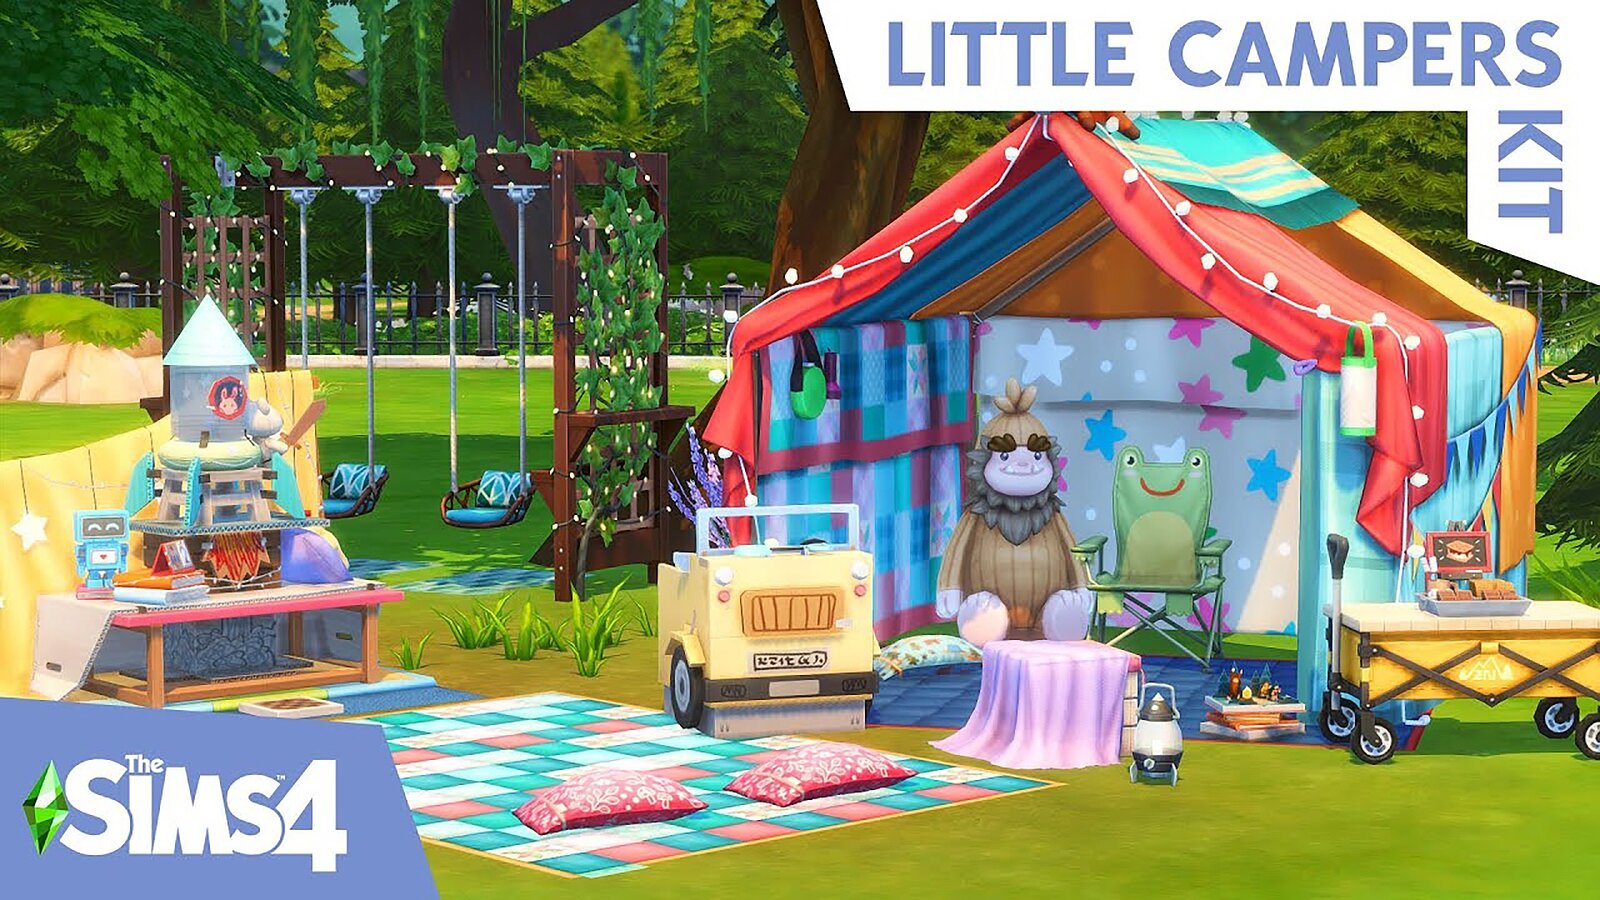 The Sims 4 - Little Campers Kit